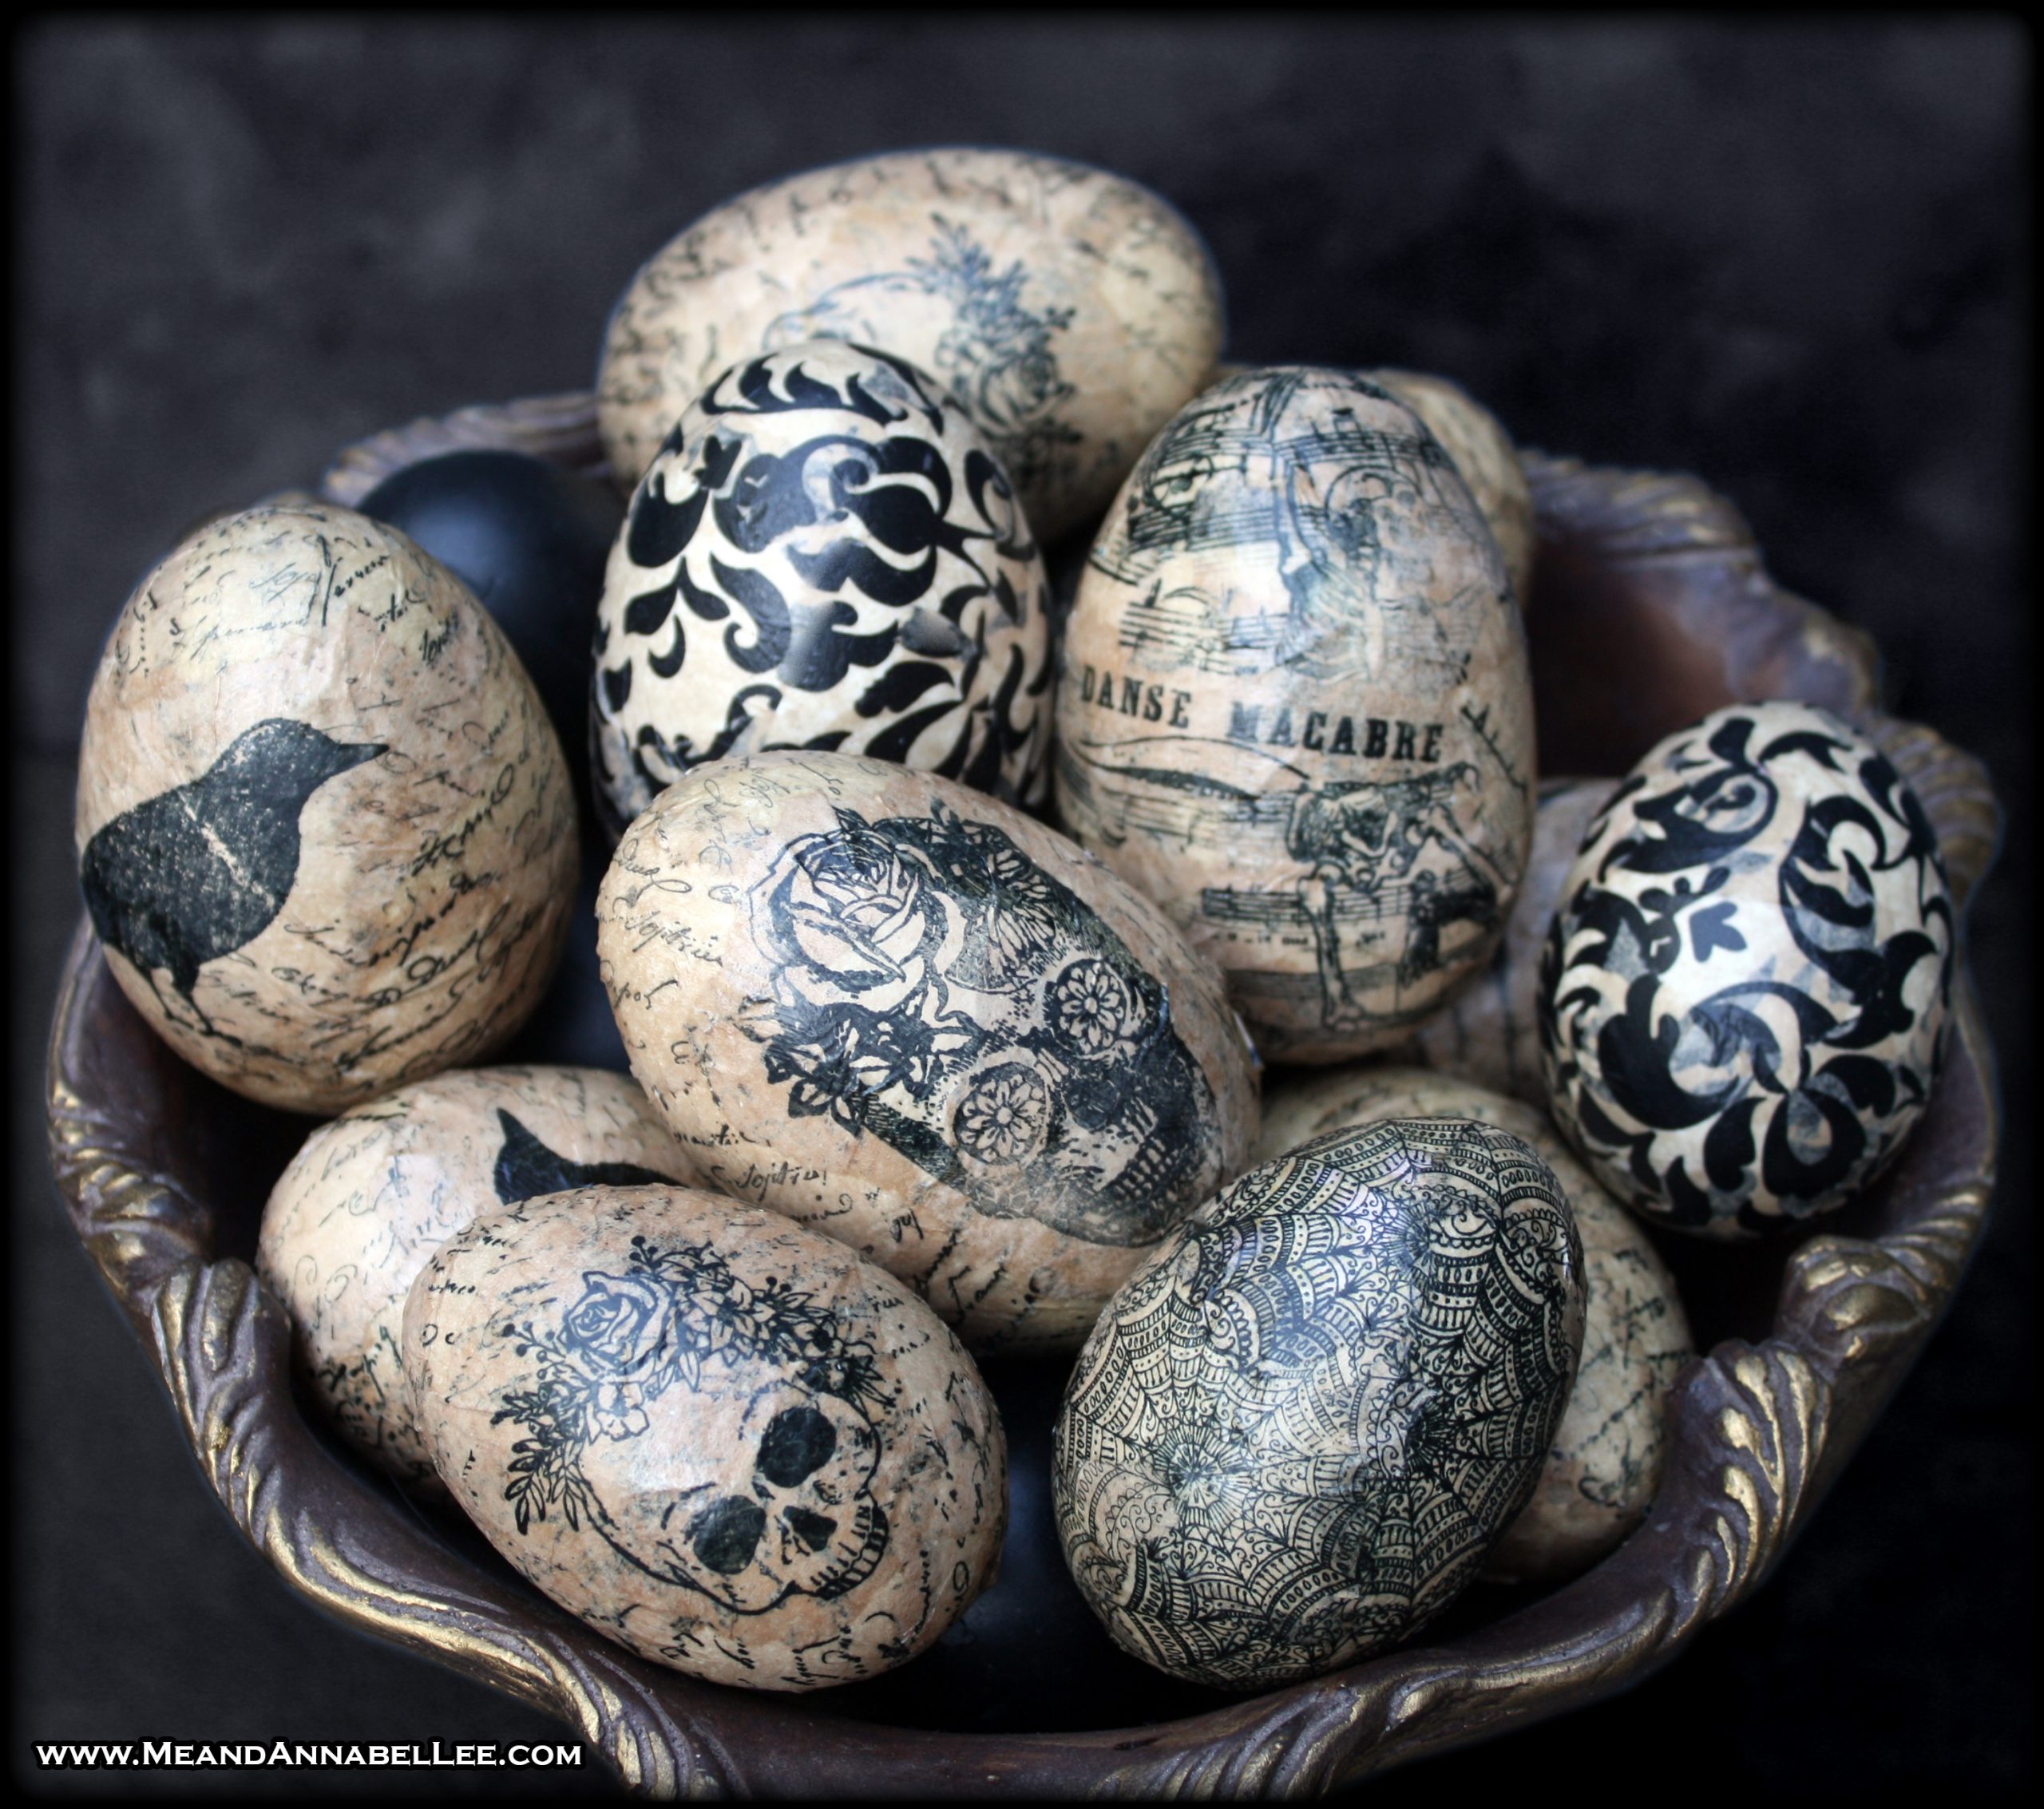 Bring some Halloween inspiration into your Spring Décor this year with these DIY Gothic Decoupage Eggs | Transform Plastic Easter Eggs into Gothic Spring Décor with this easy and inexpensive project using Halloween inspired Stamps | Skulls, Bats, Ravens, Spiderwebs | A SpringOWeen Goth It Yourself Project | Me and Annabel Lee Blog